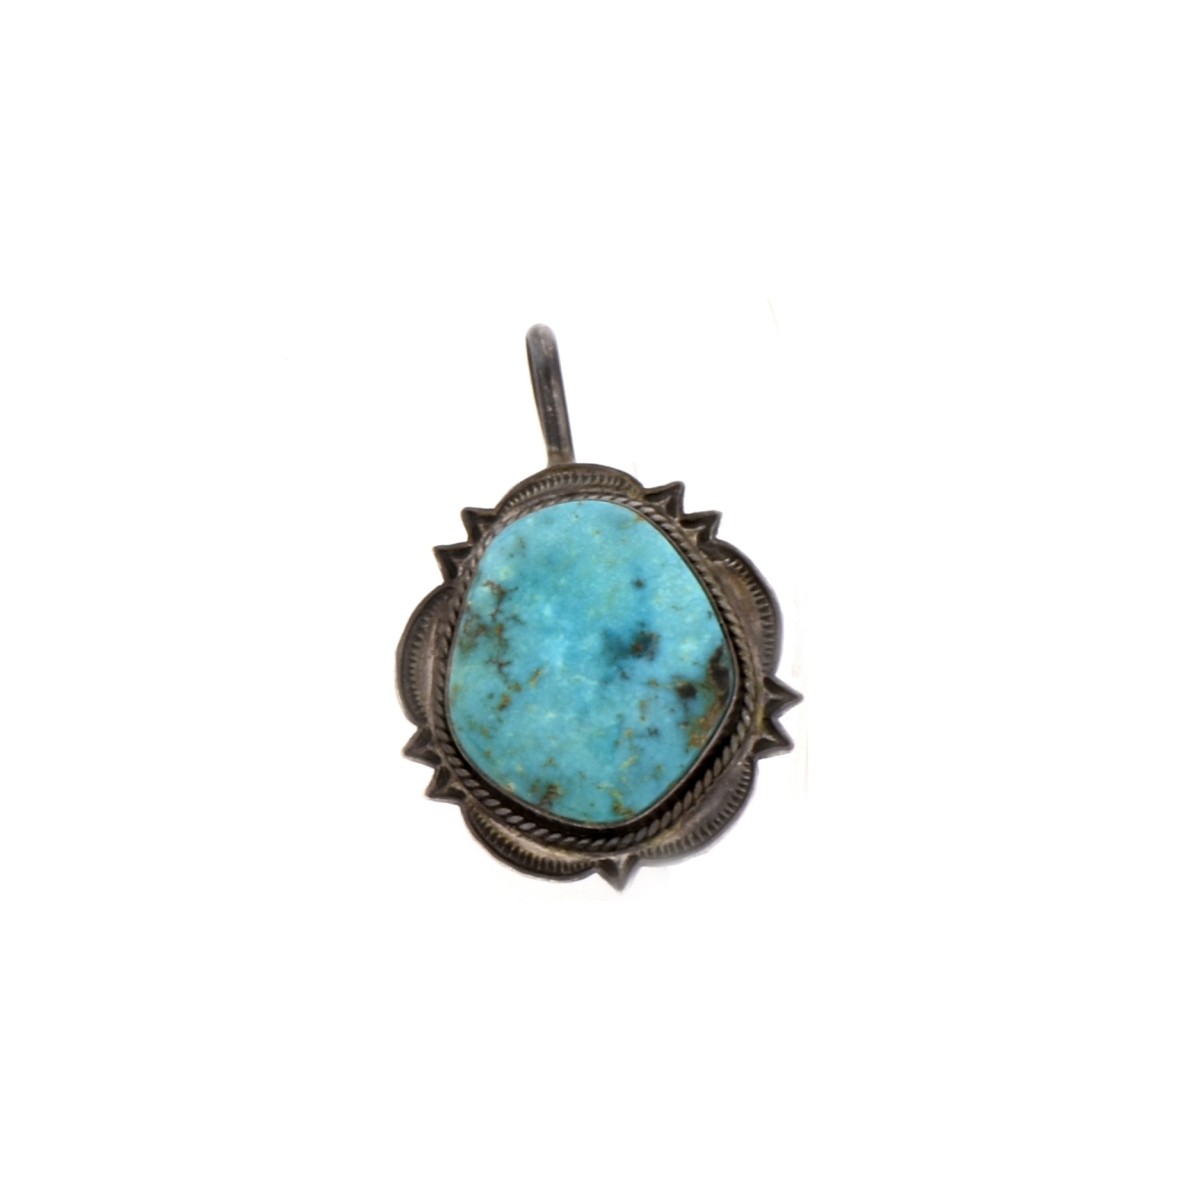 Agate/Turquoise Necklace and Turquoise Pendant